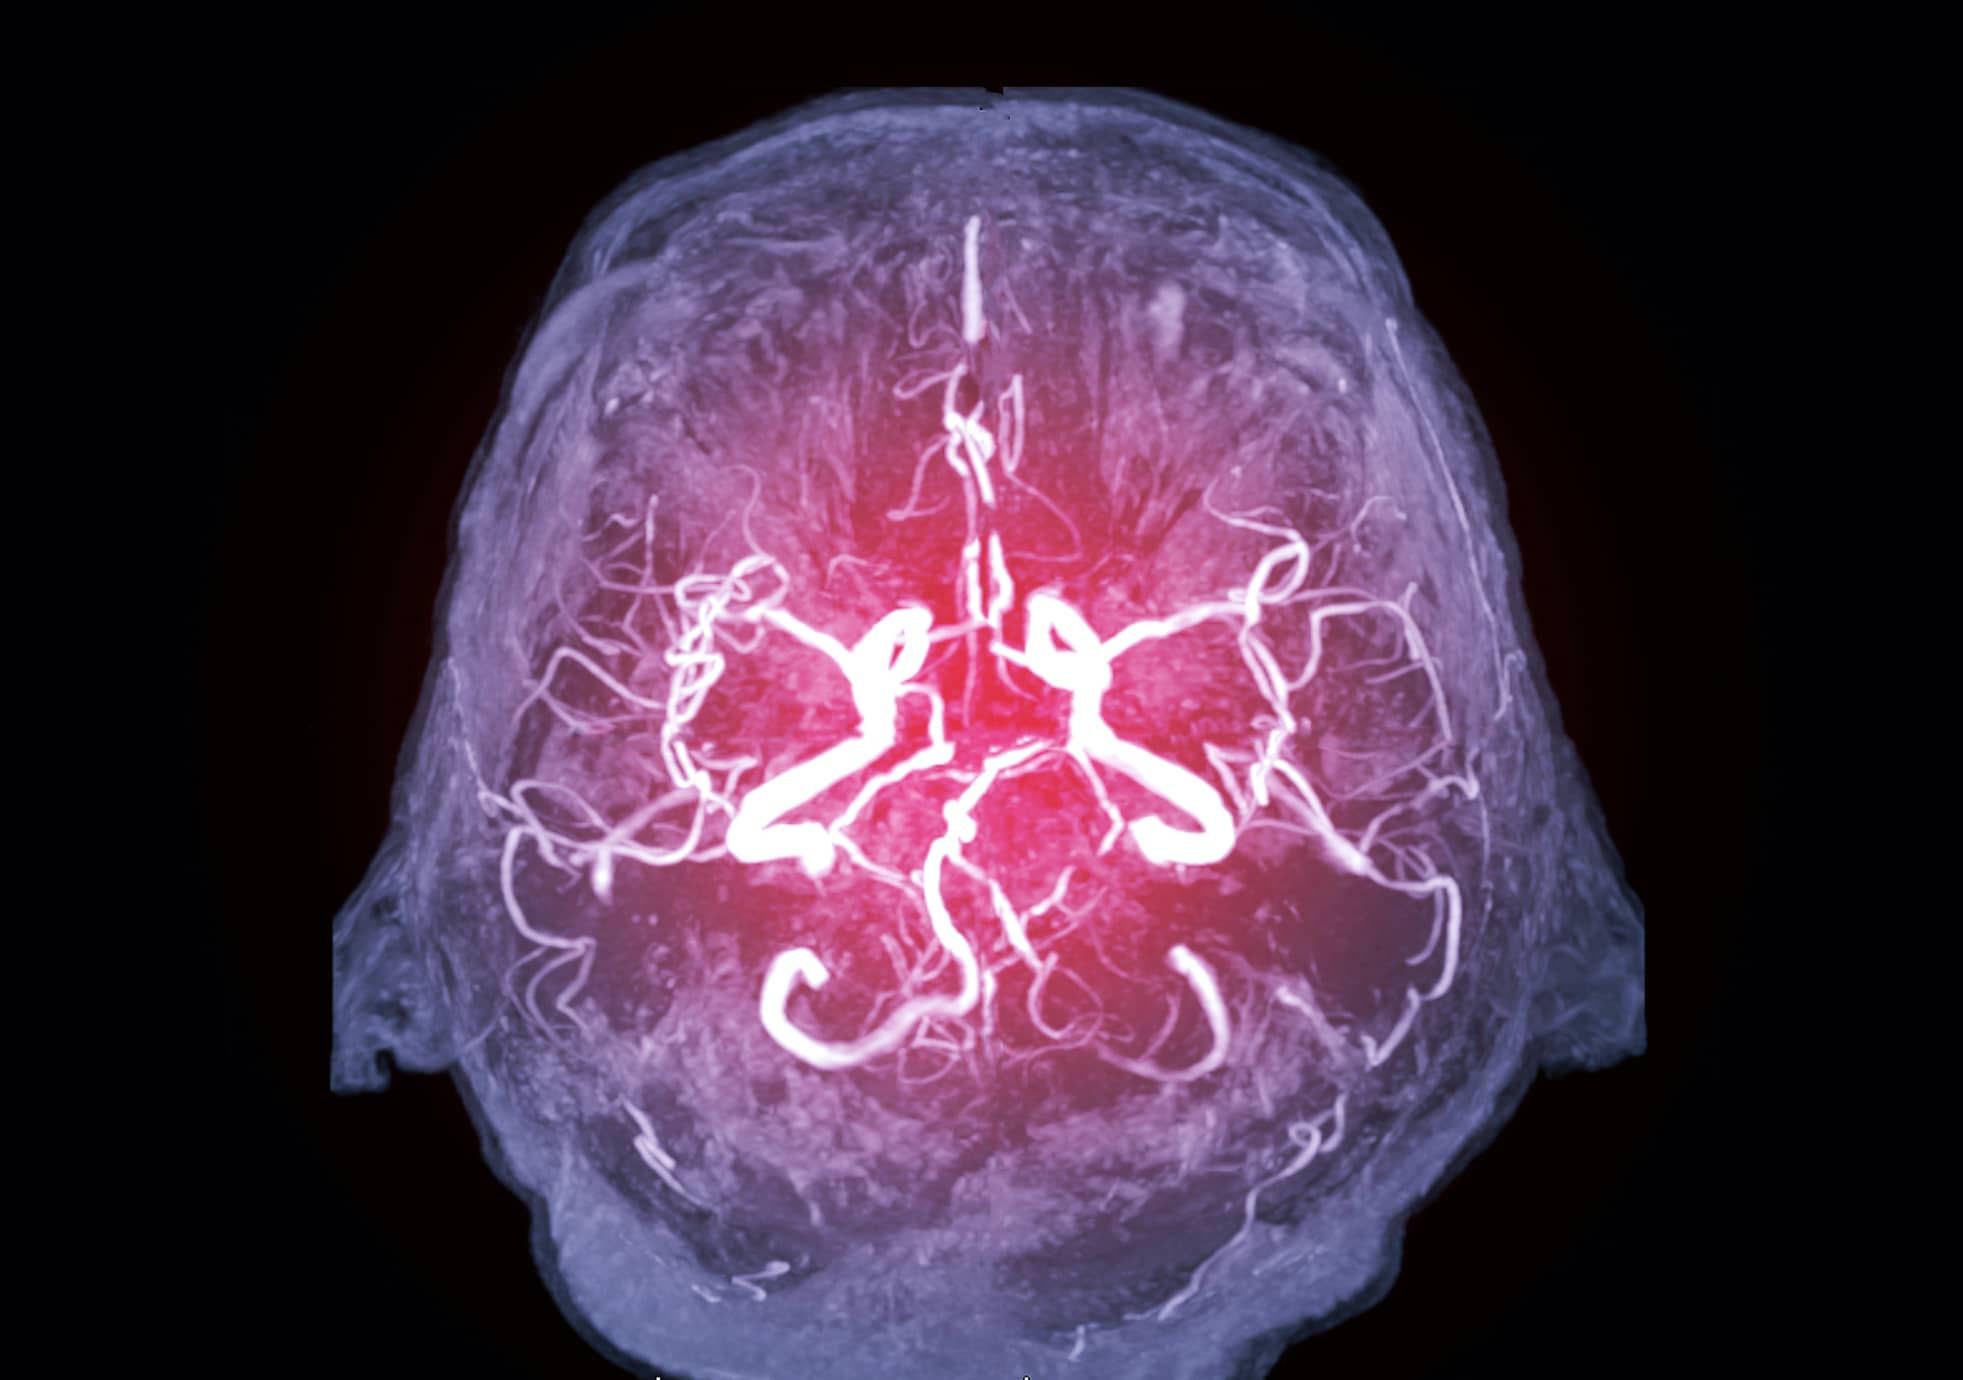 Magnetic resonance image (MRI) of Vessel in the brain axial view or MRA brain.